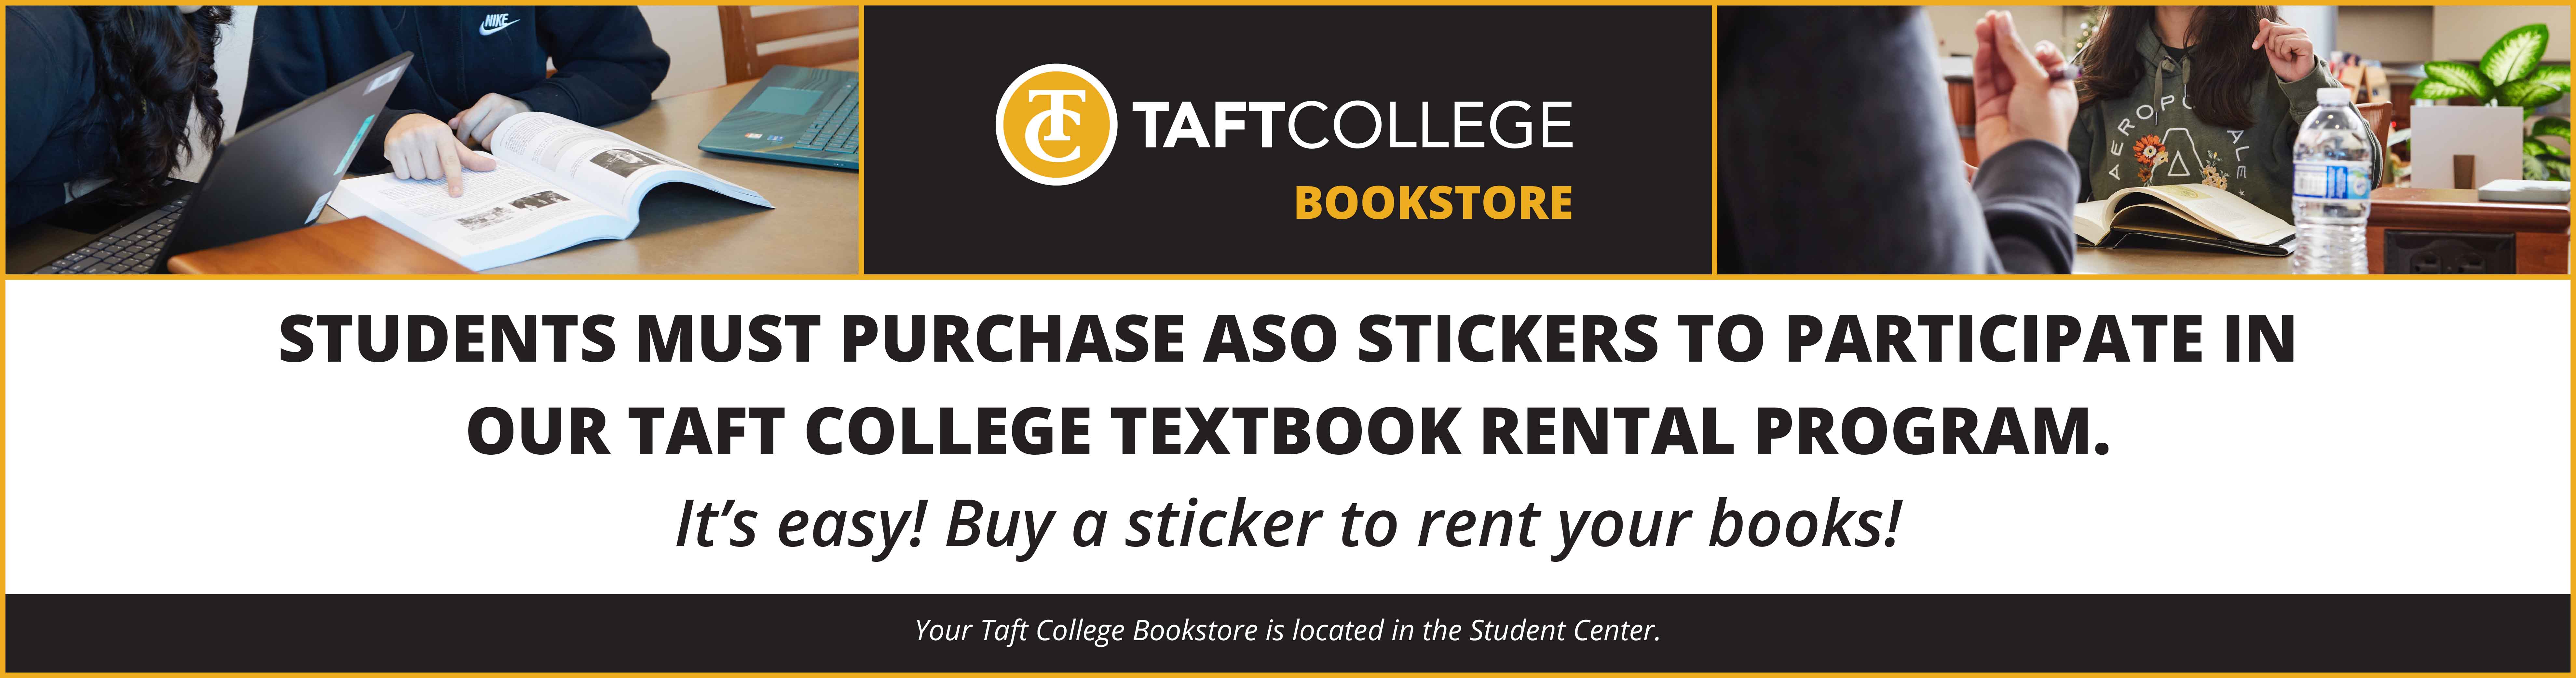 Students must purchase ASO Stickers to participate in our taft college textbook rental program